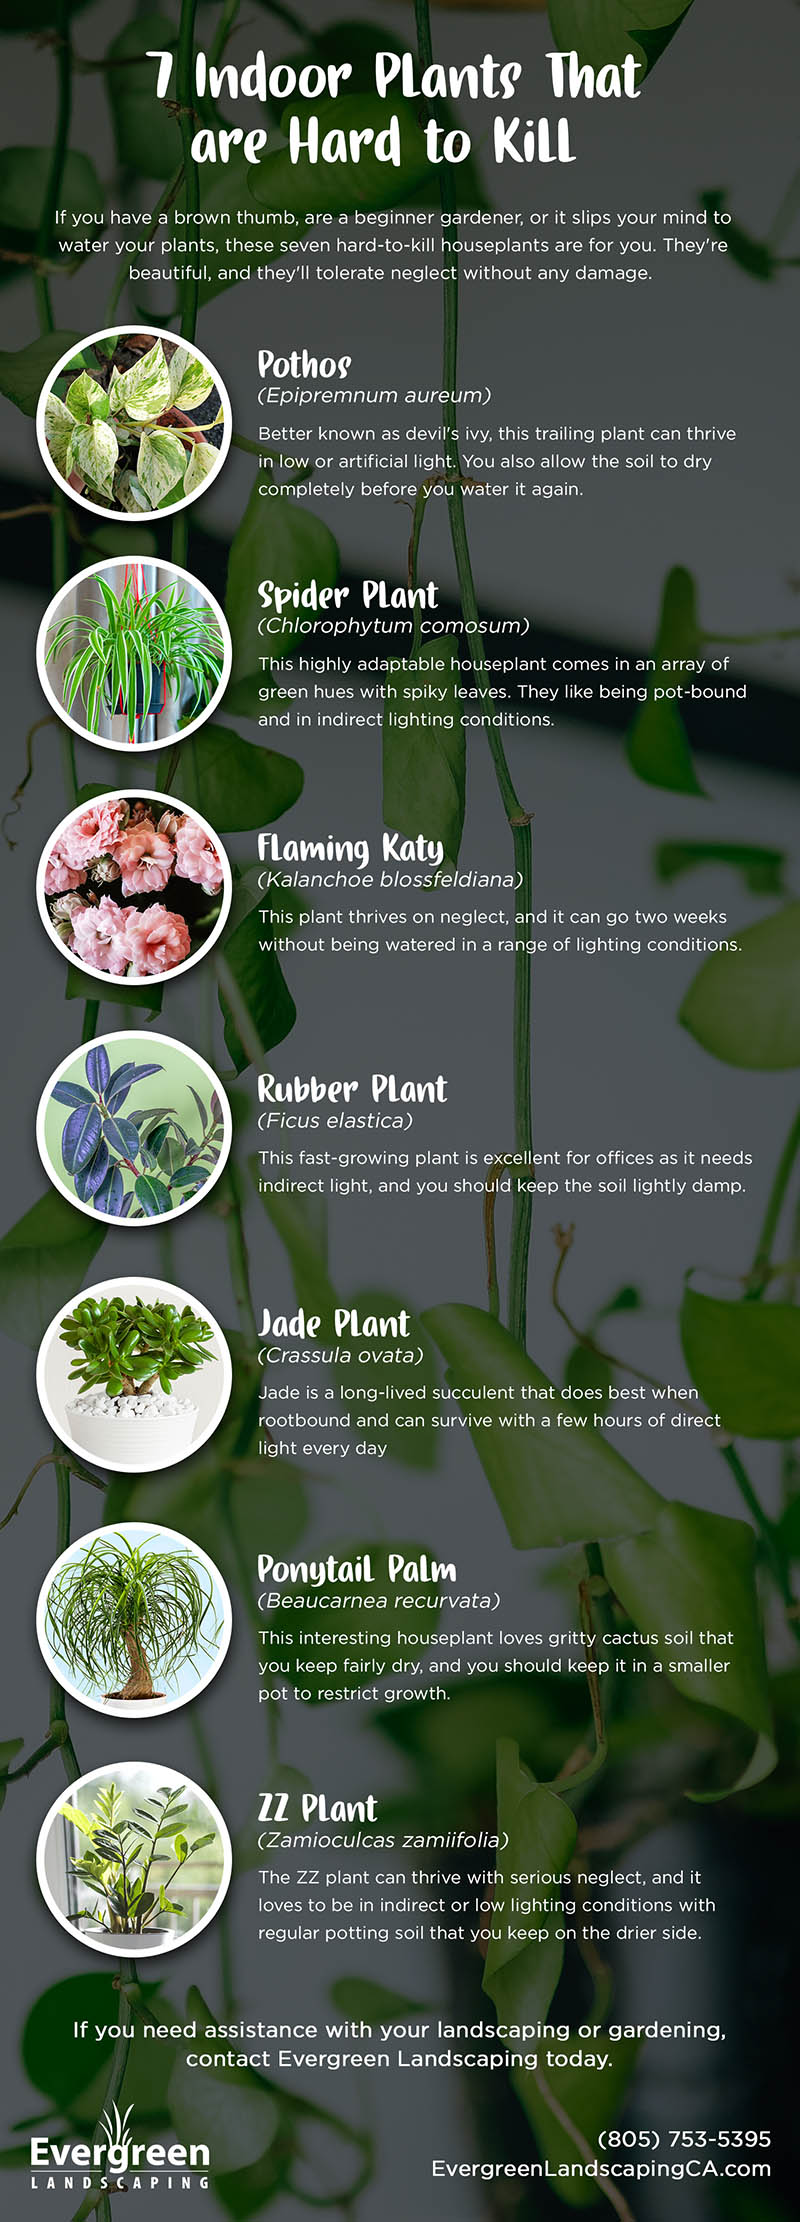 7 Indoor Plants That are Hard to Kill